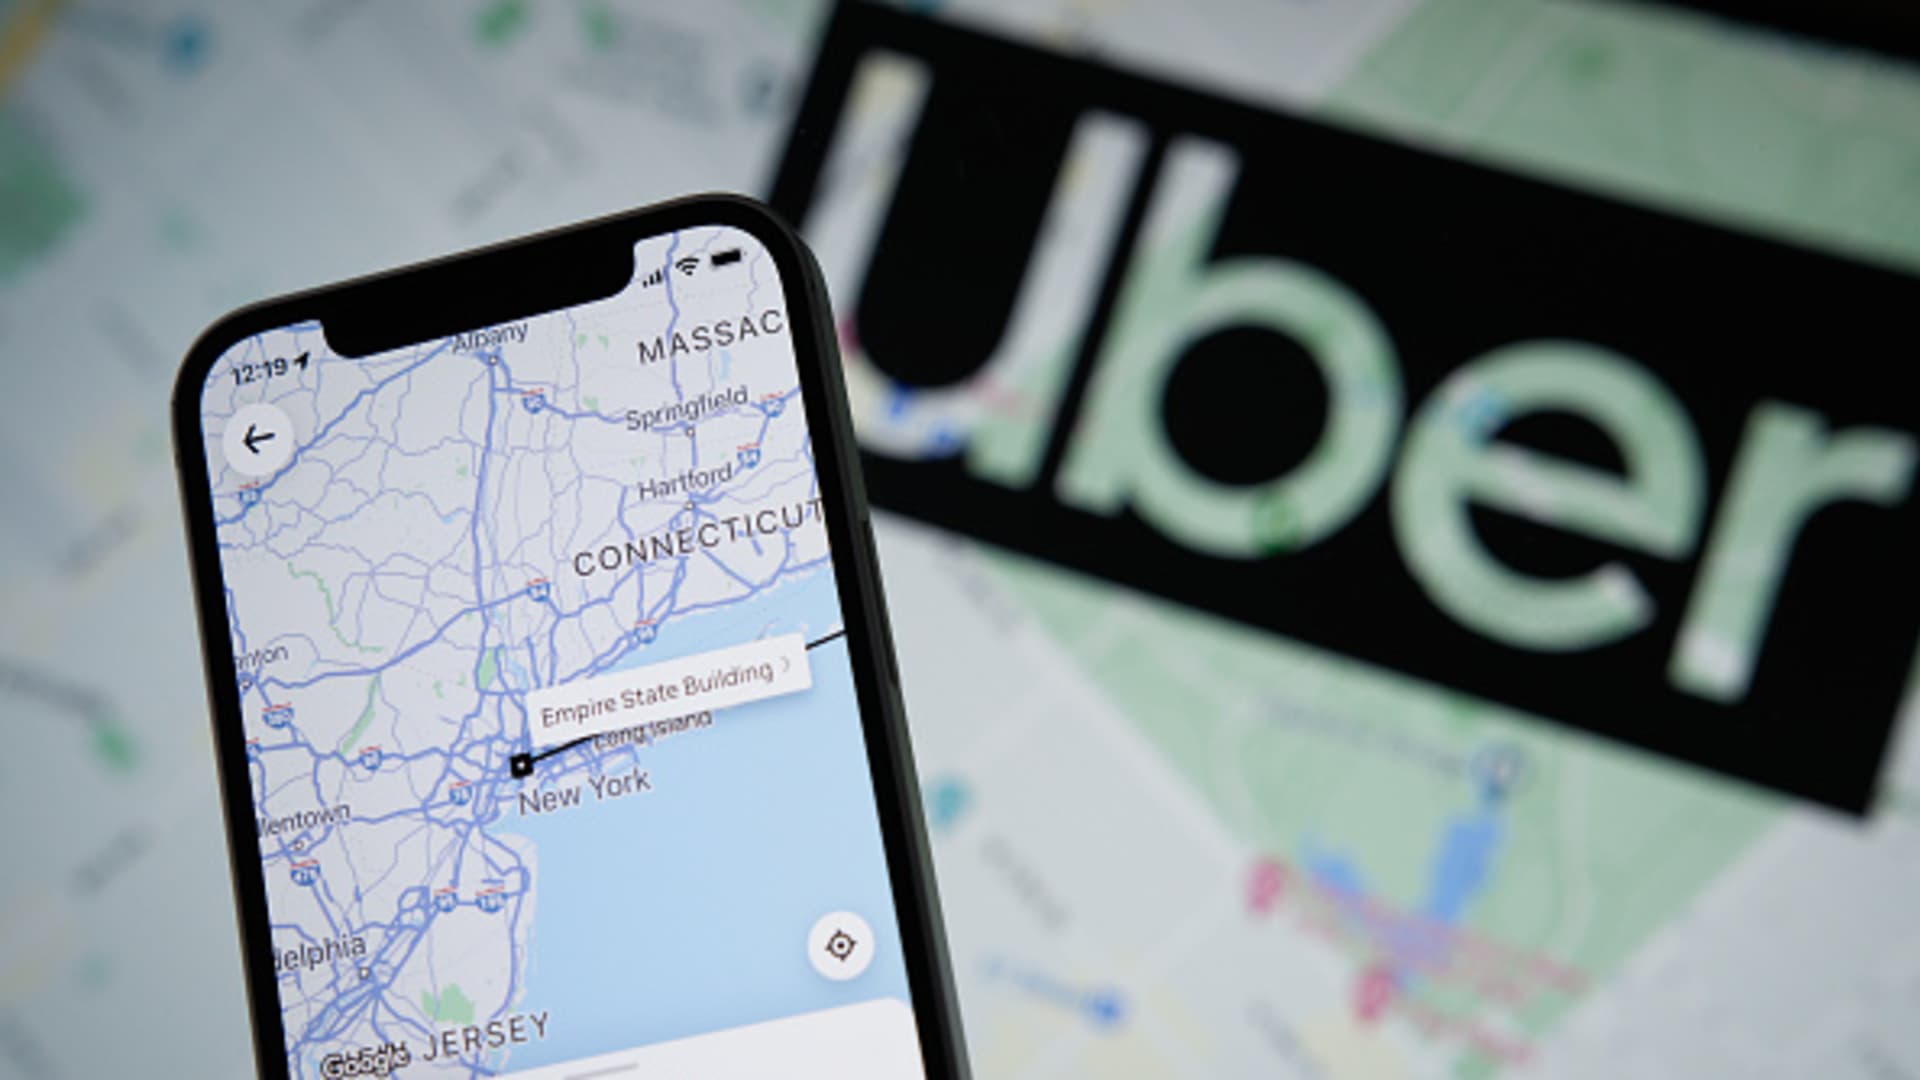 over gig ends Uber, Lyft How economy battle the drivers